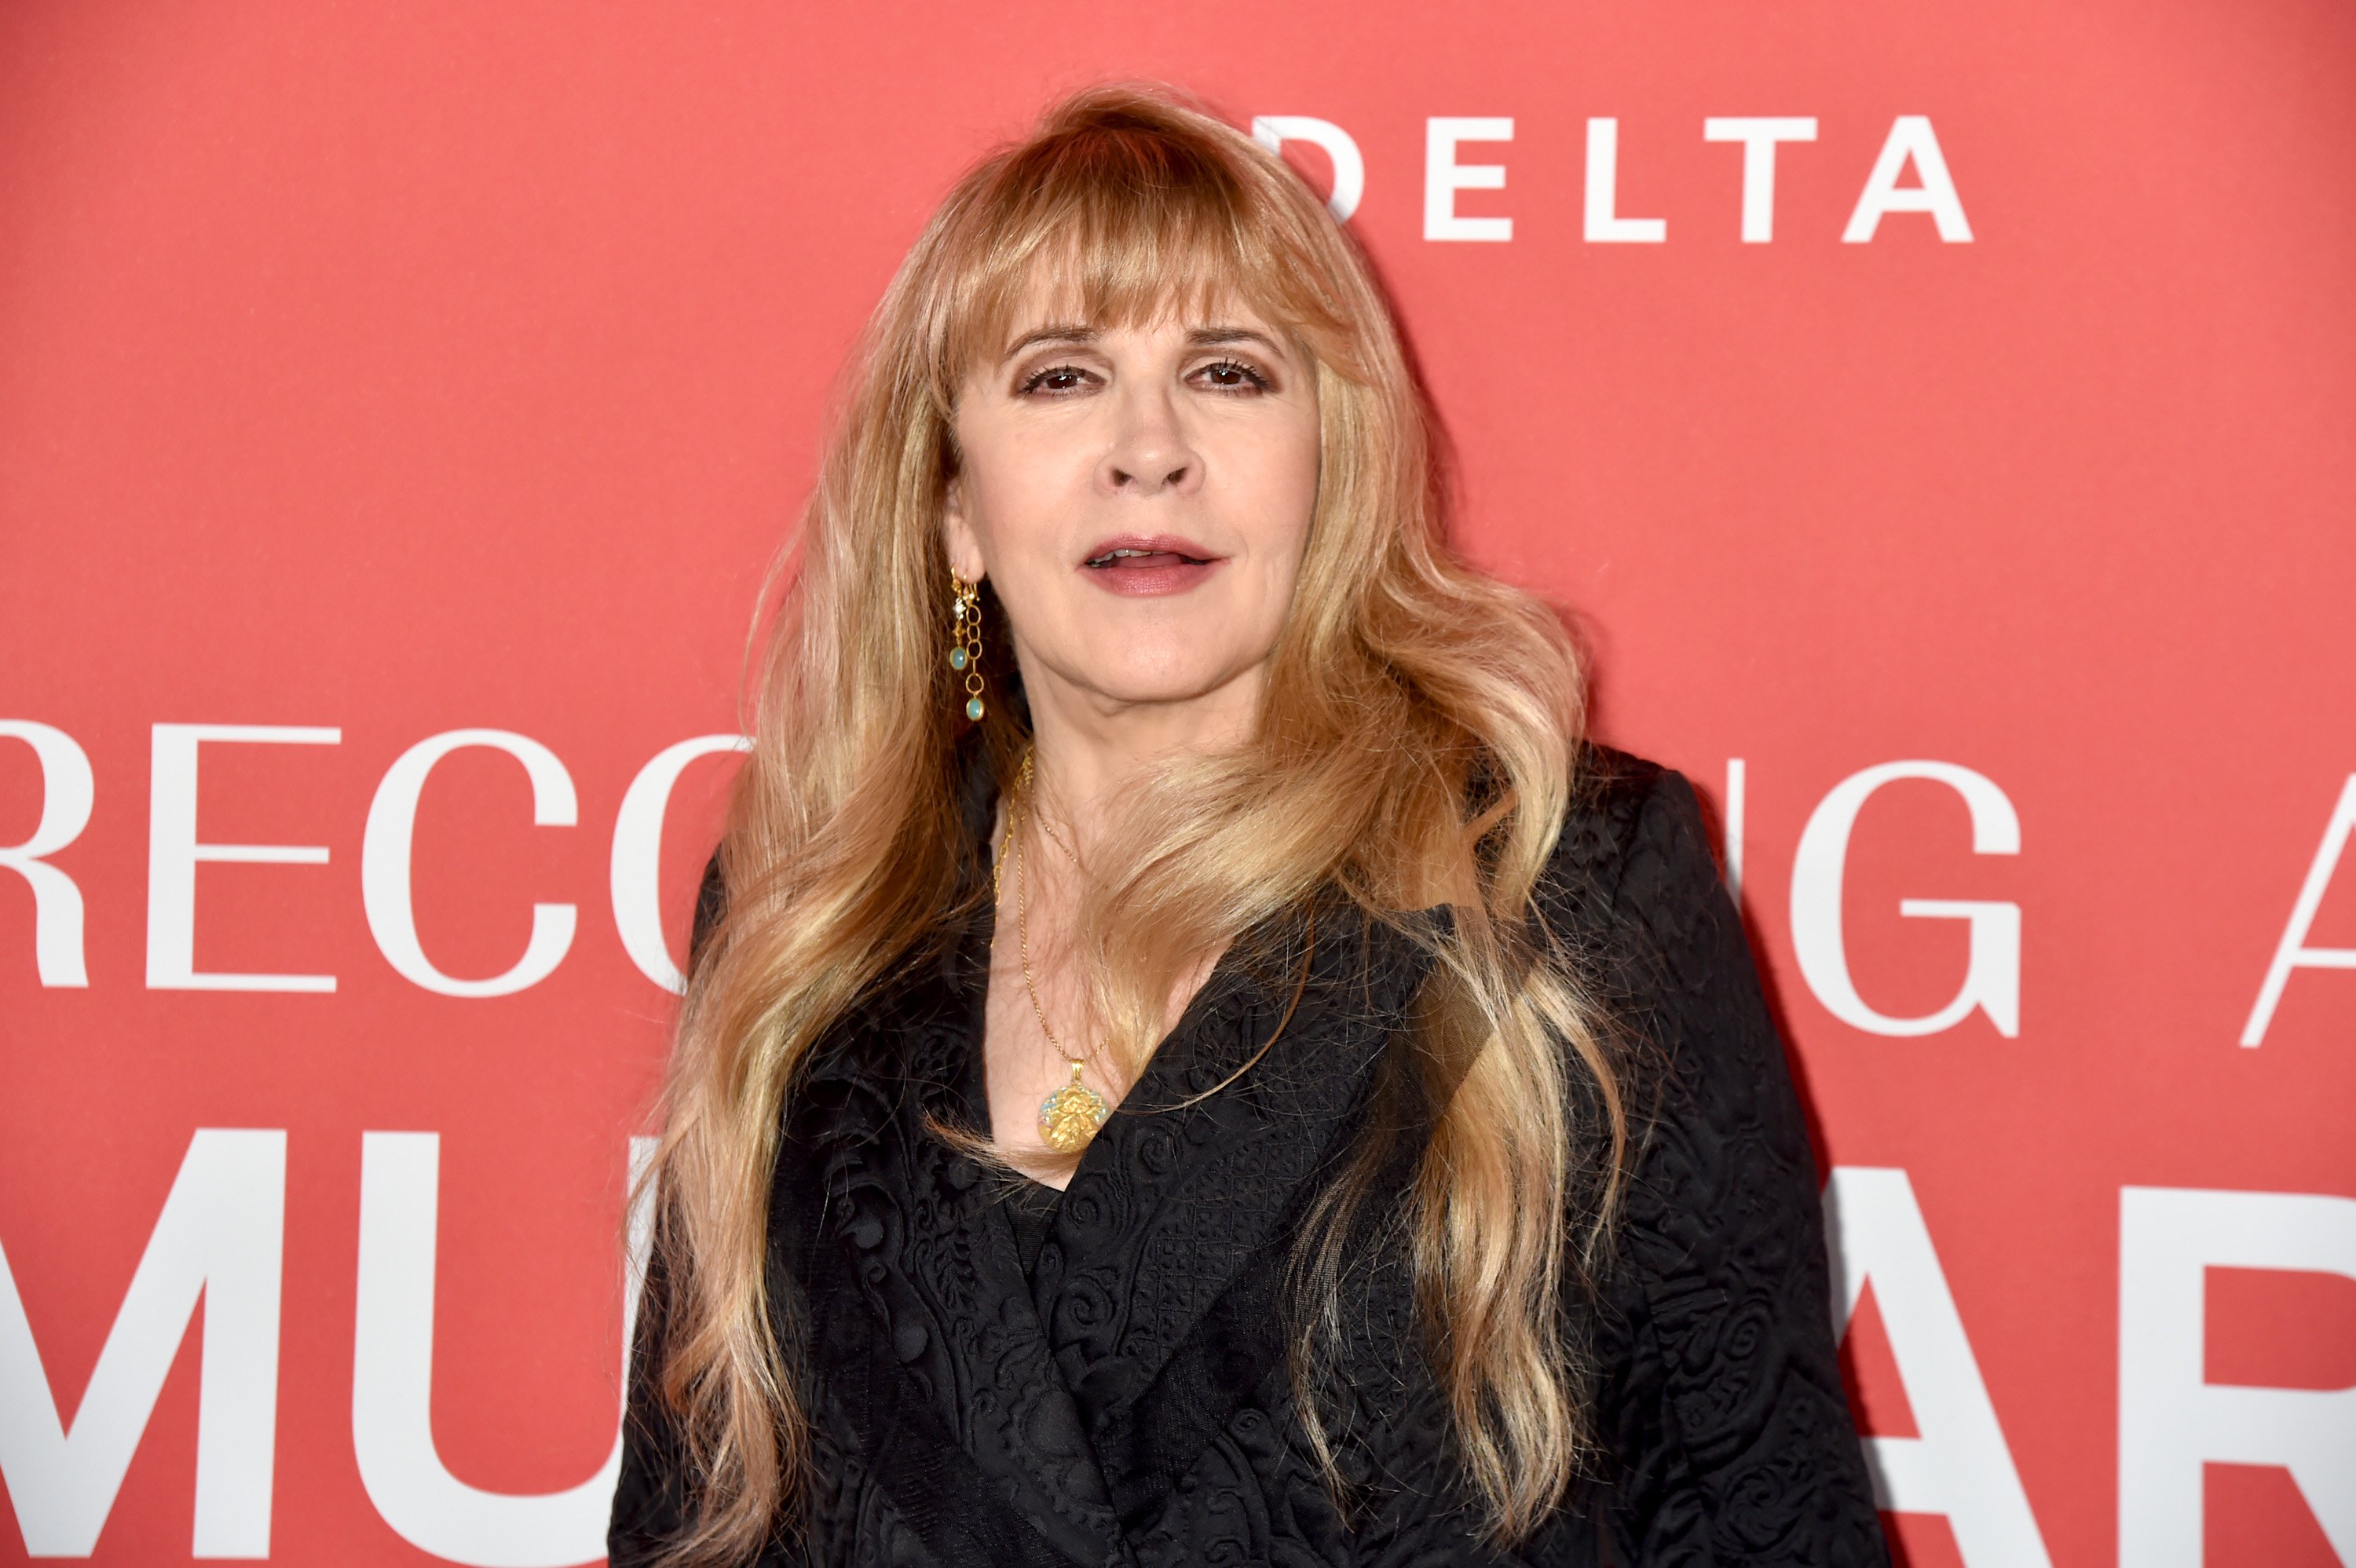 Stevie Nicks poses in front of a red wall.